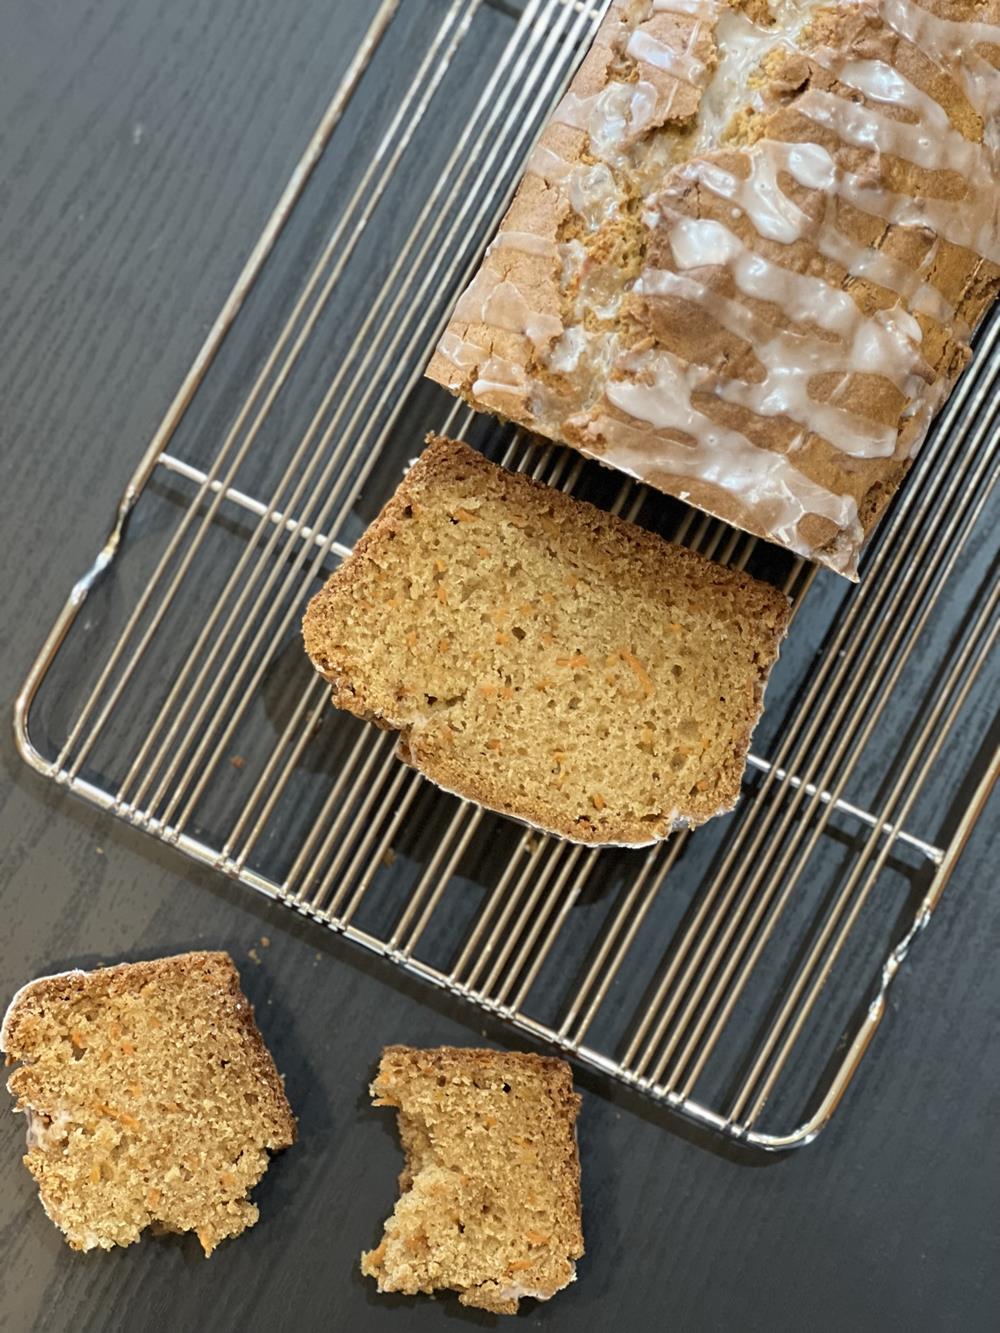 Gluten Free Carrot Bread sliced on a cooling rack on a black counter